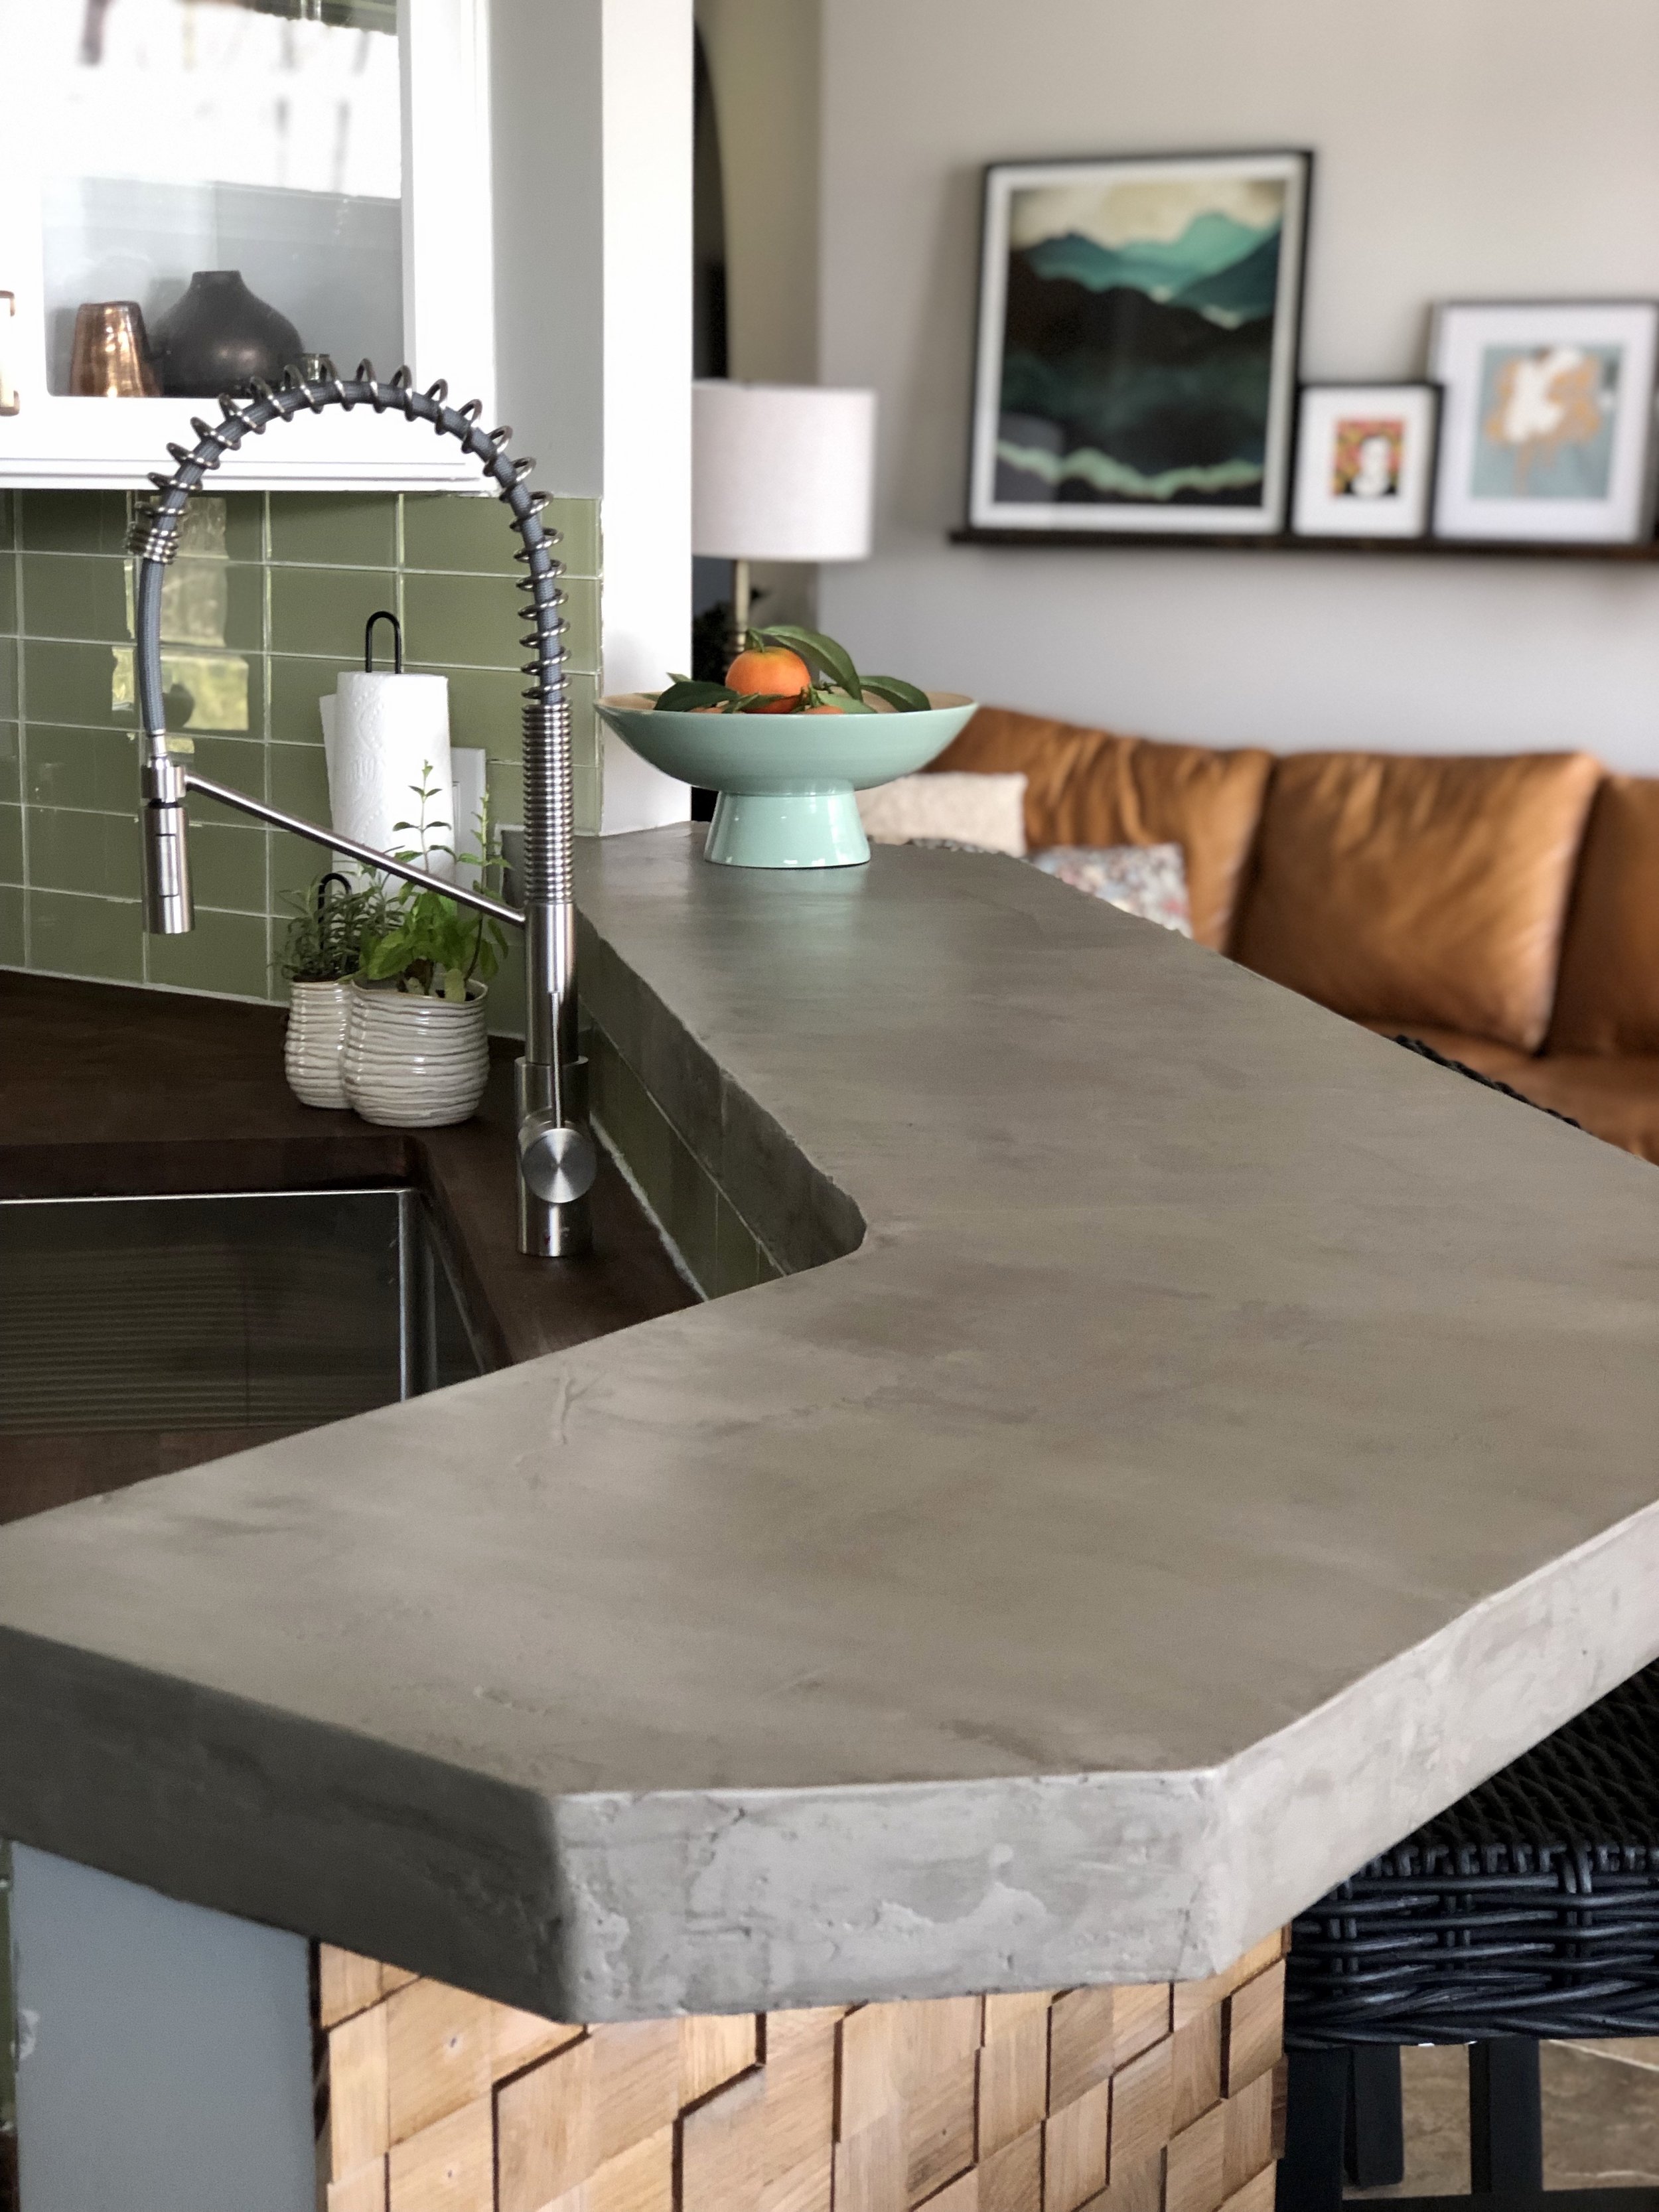 How to DIY a Concrete Bar - In a — a life unfolding